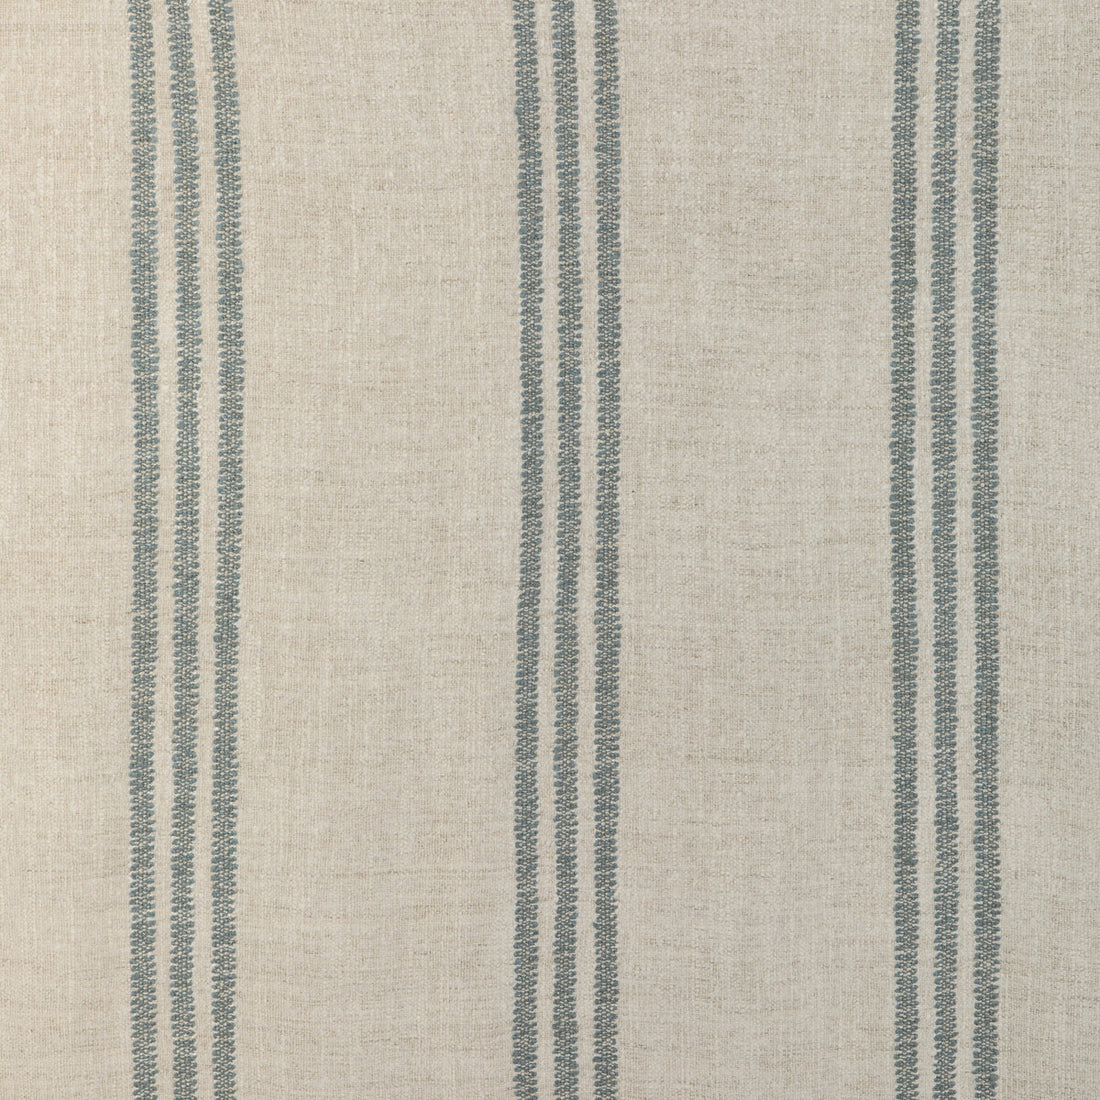 Karphi Stripe fabric in sky color - pattern 35860.1635.0 - by Kravet Couture in the Atelier Weaves collection